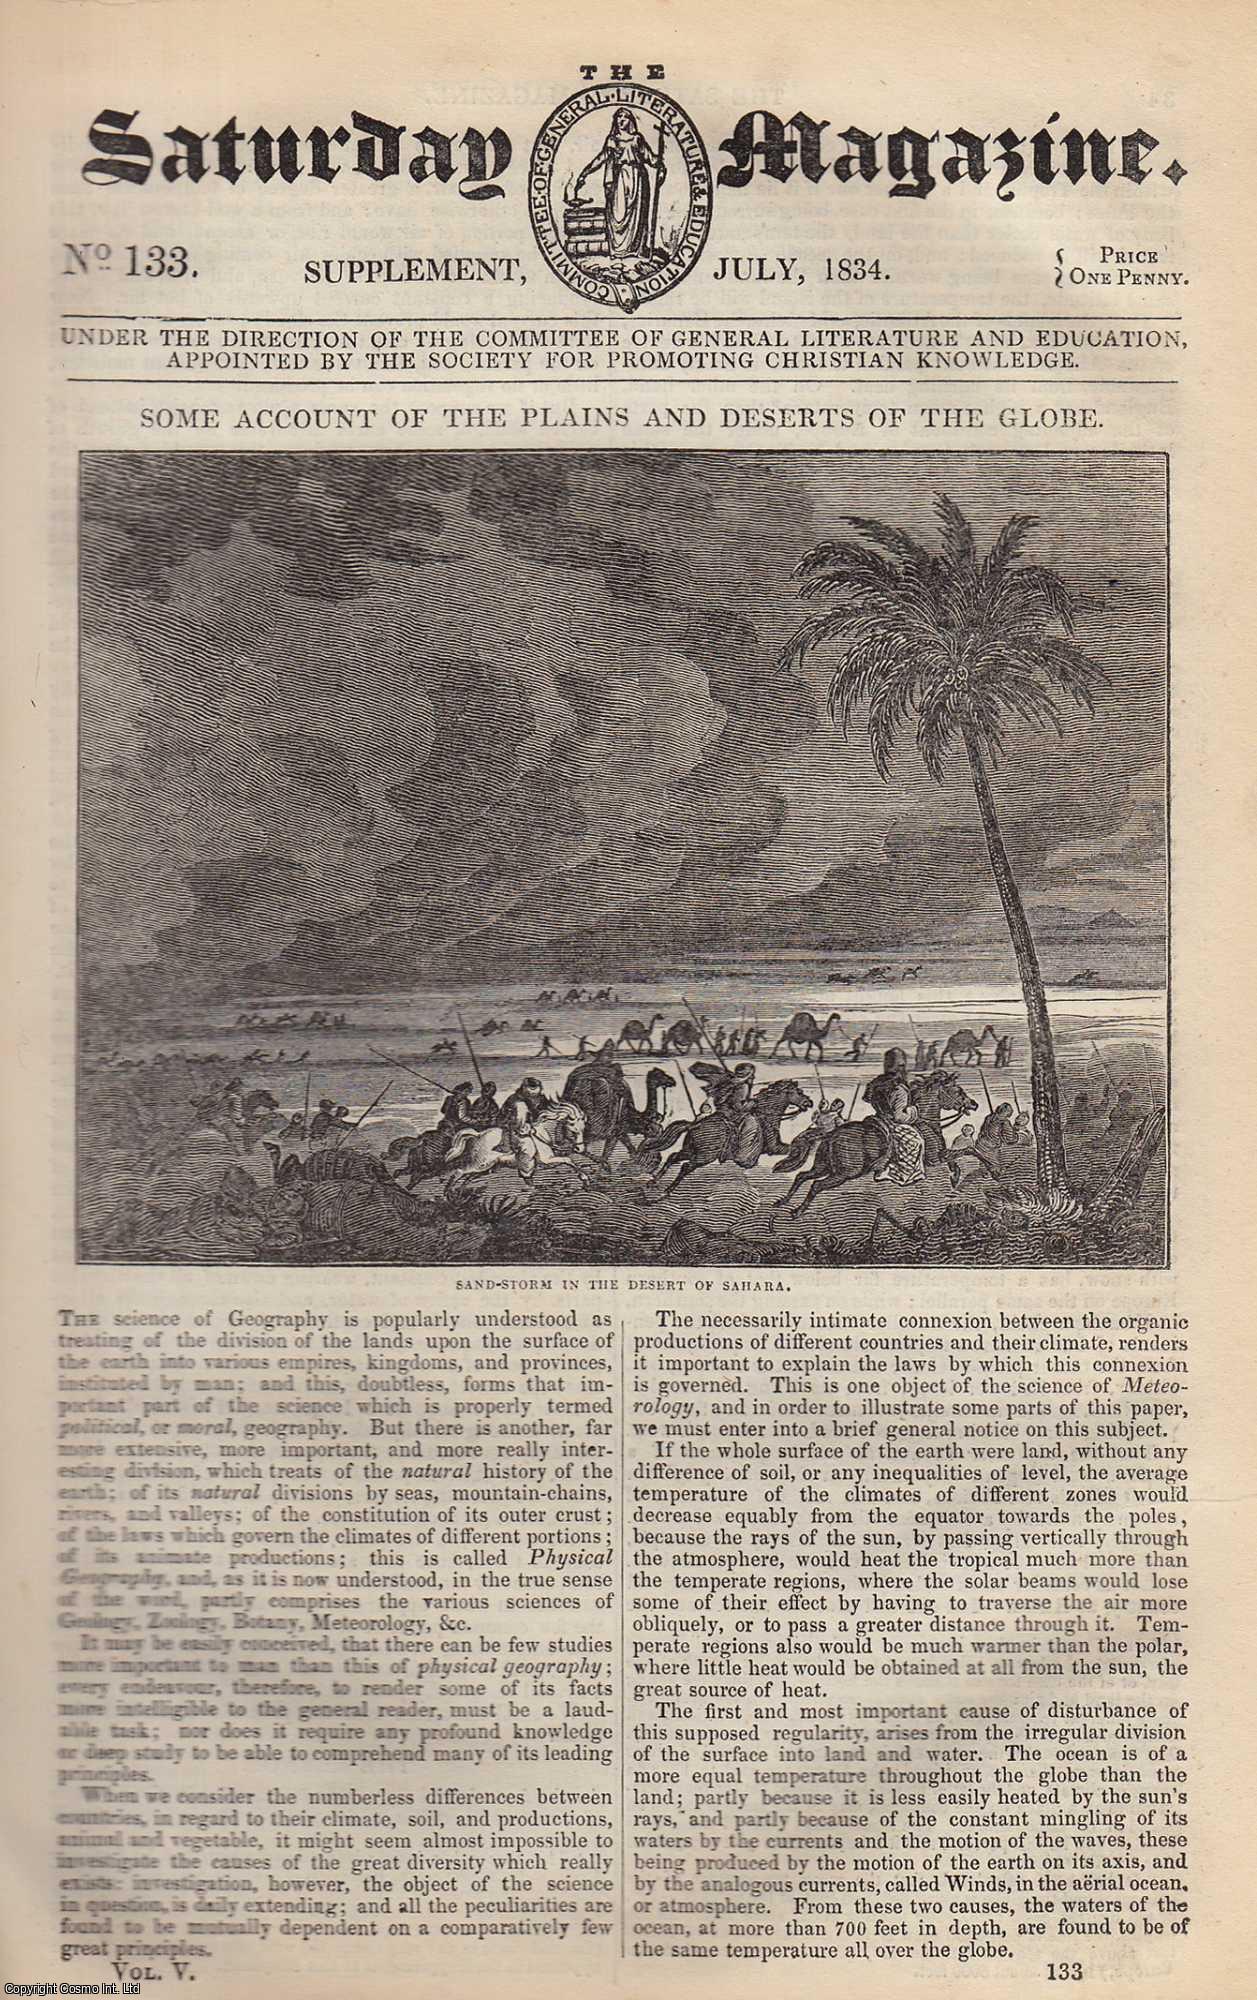 Saturday Magazine - The Plains and Deserts of The Globe; The Llanos; The Pampas; The Great Desert of Africa; The Table Land of Central Asia. Issue No. 133. July, 1834. A complete rare weekly issue of the Saturday Magazine, 1834.